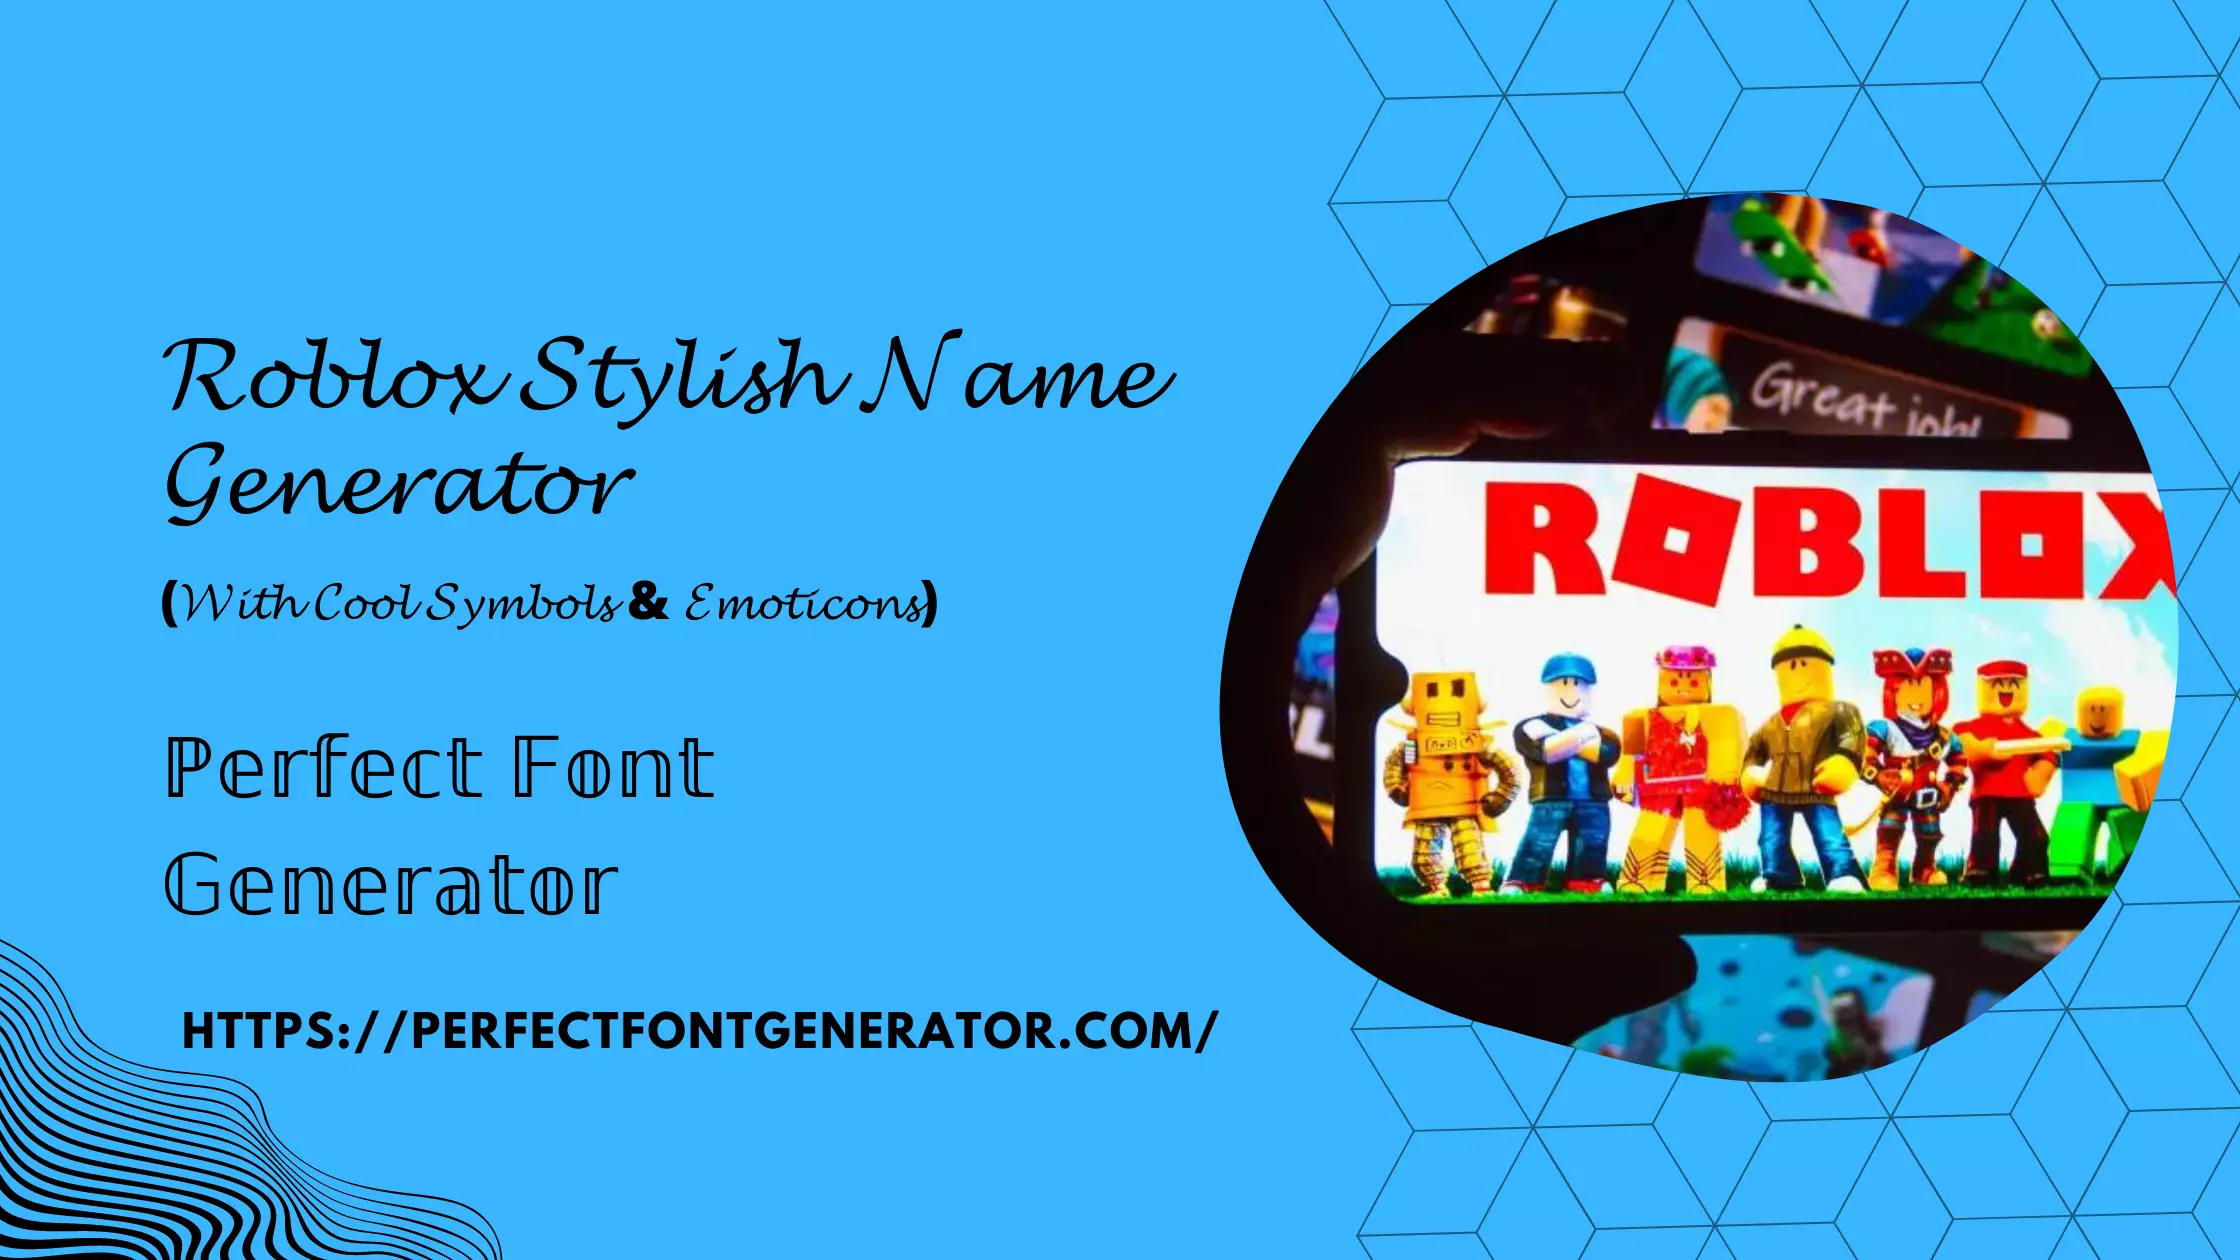 roblox-video-game-stylish-name-font-text-generator-with-cool-symbols-online-copy-paste-tool